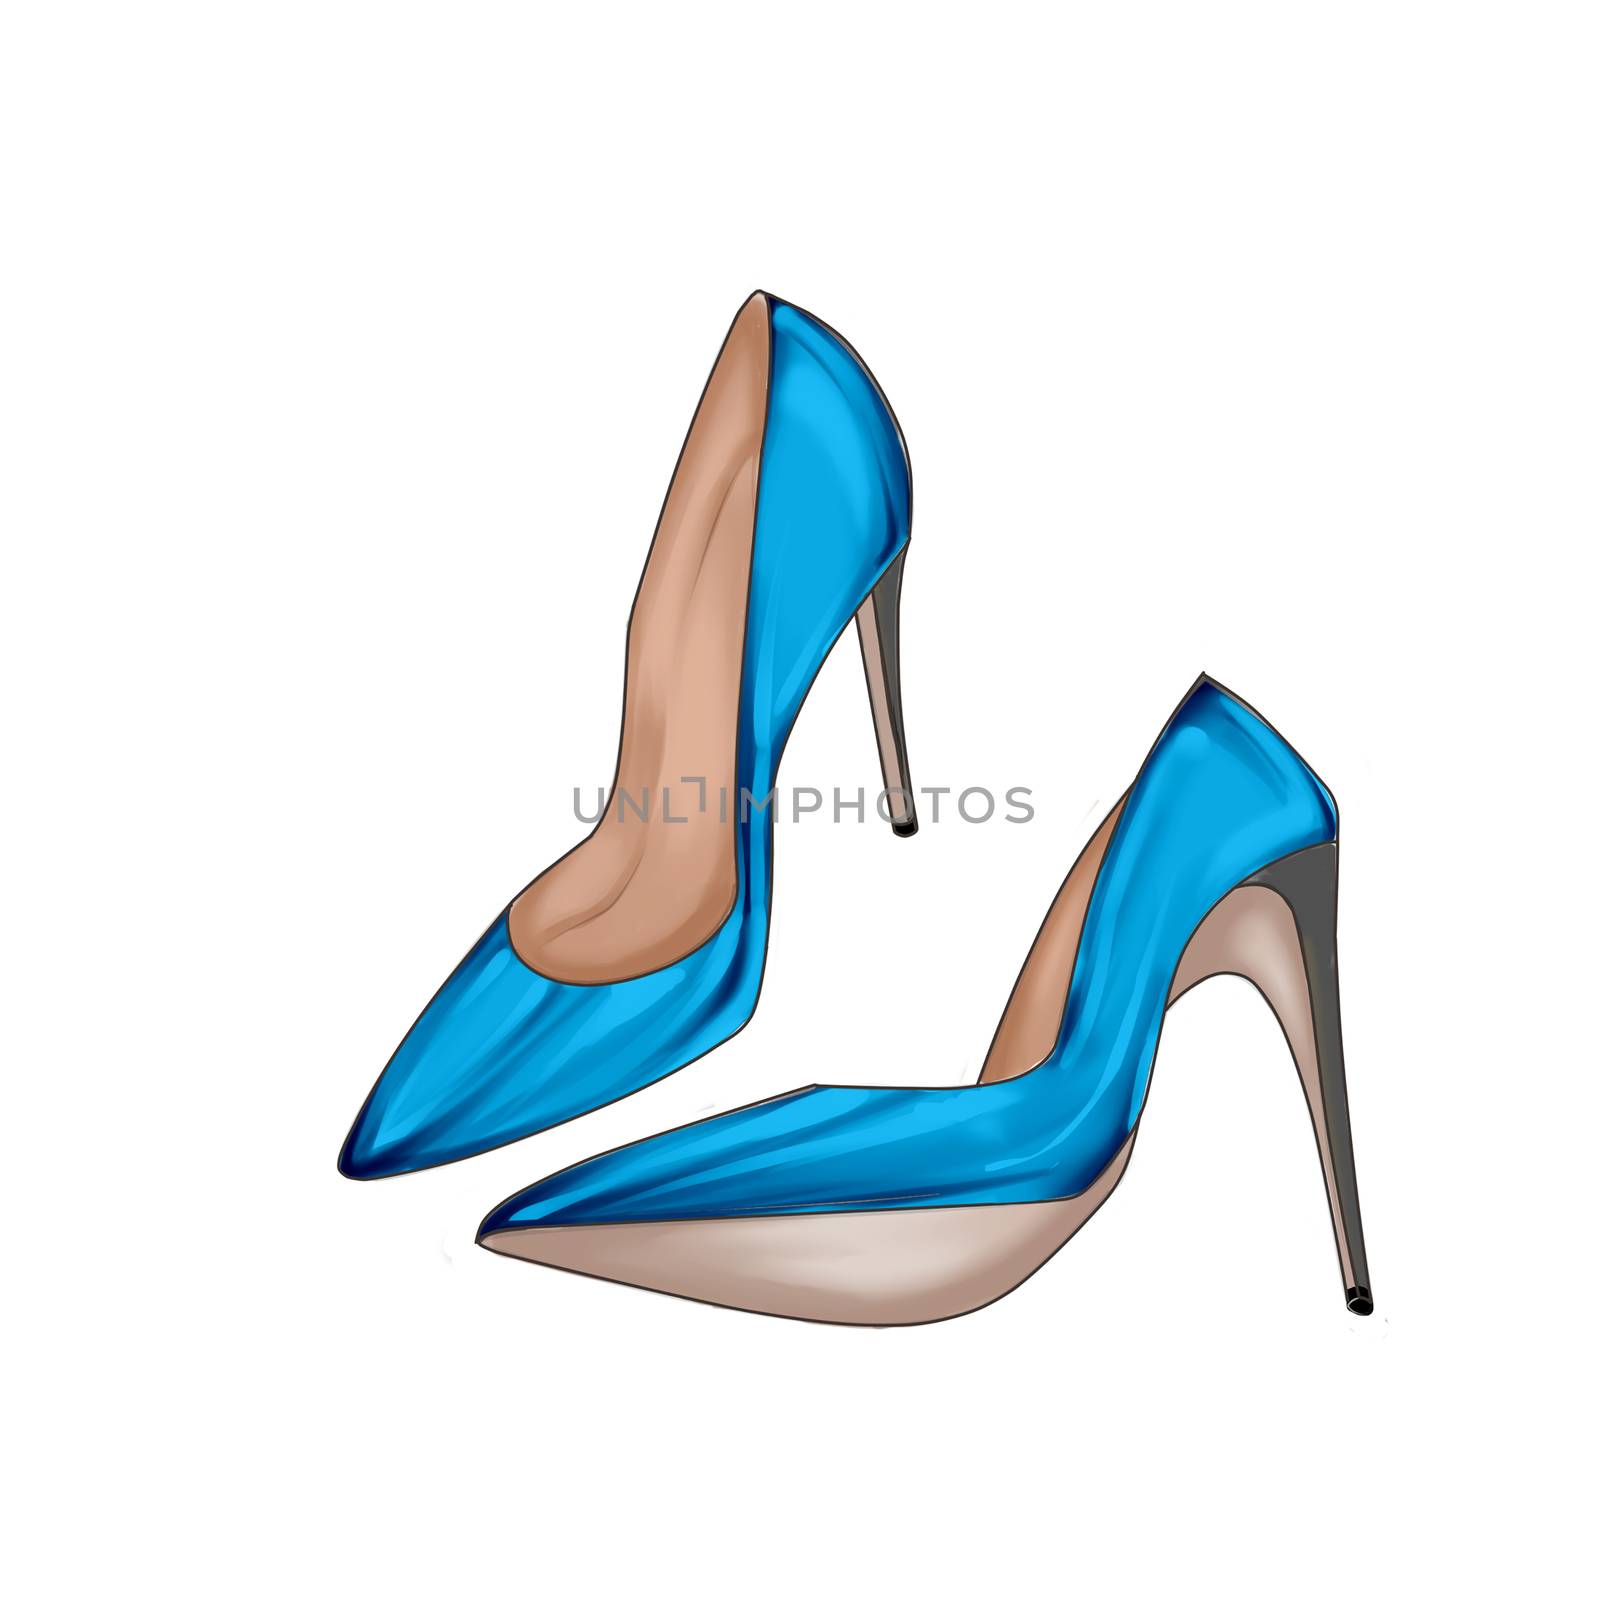 Hand drawn Illustration of a pair of Blue stiletto shoes by GGillustrations